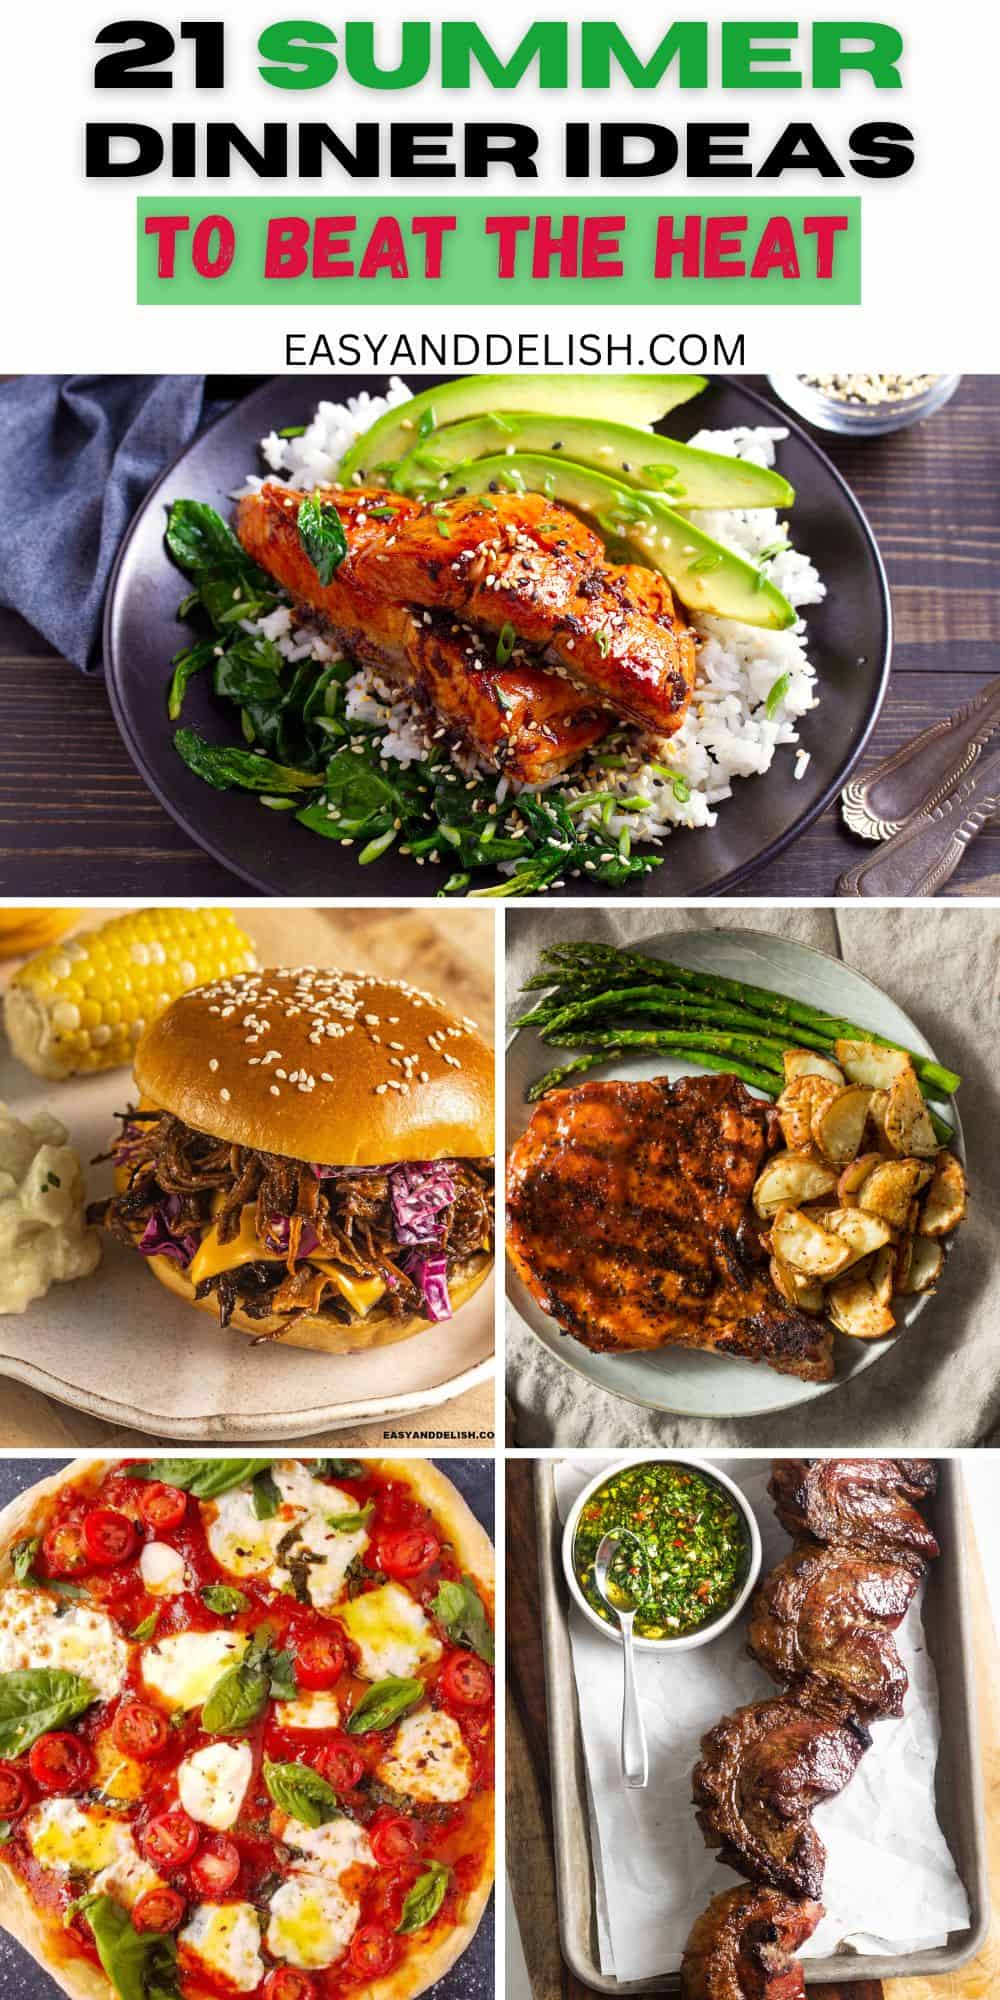 Pin showing summer dinner ideas, including air fryer salmon, BBQ pulled brisket sandwich, pizza Margherita, and grilled picanha steak.